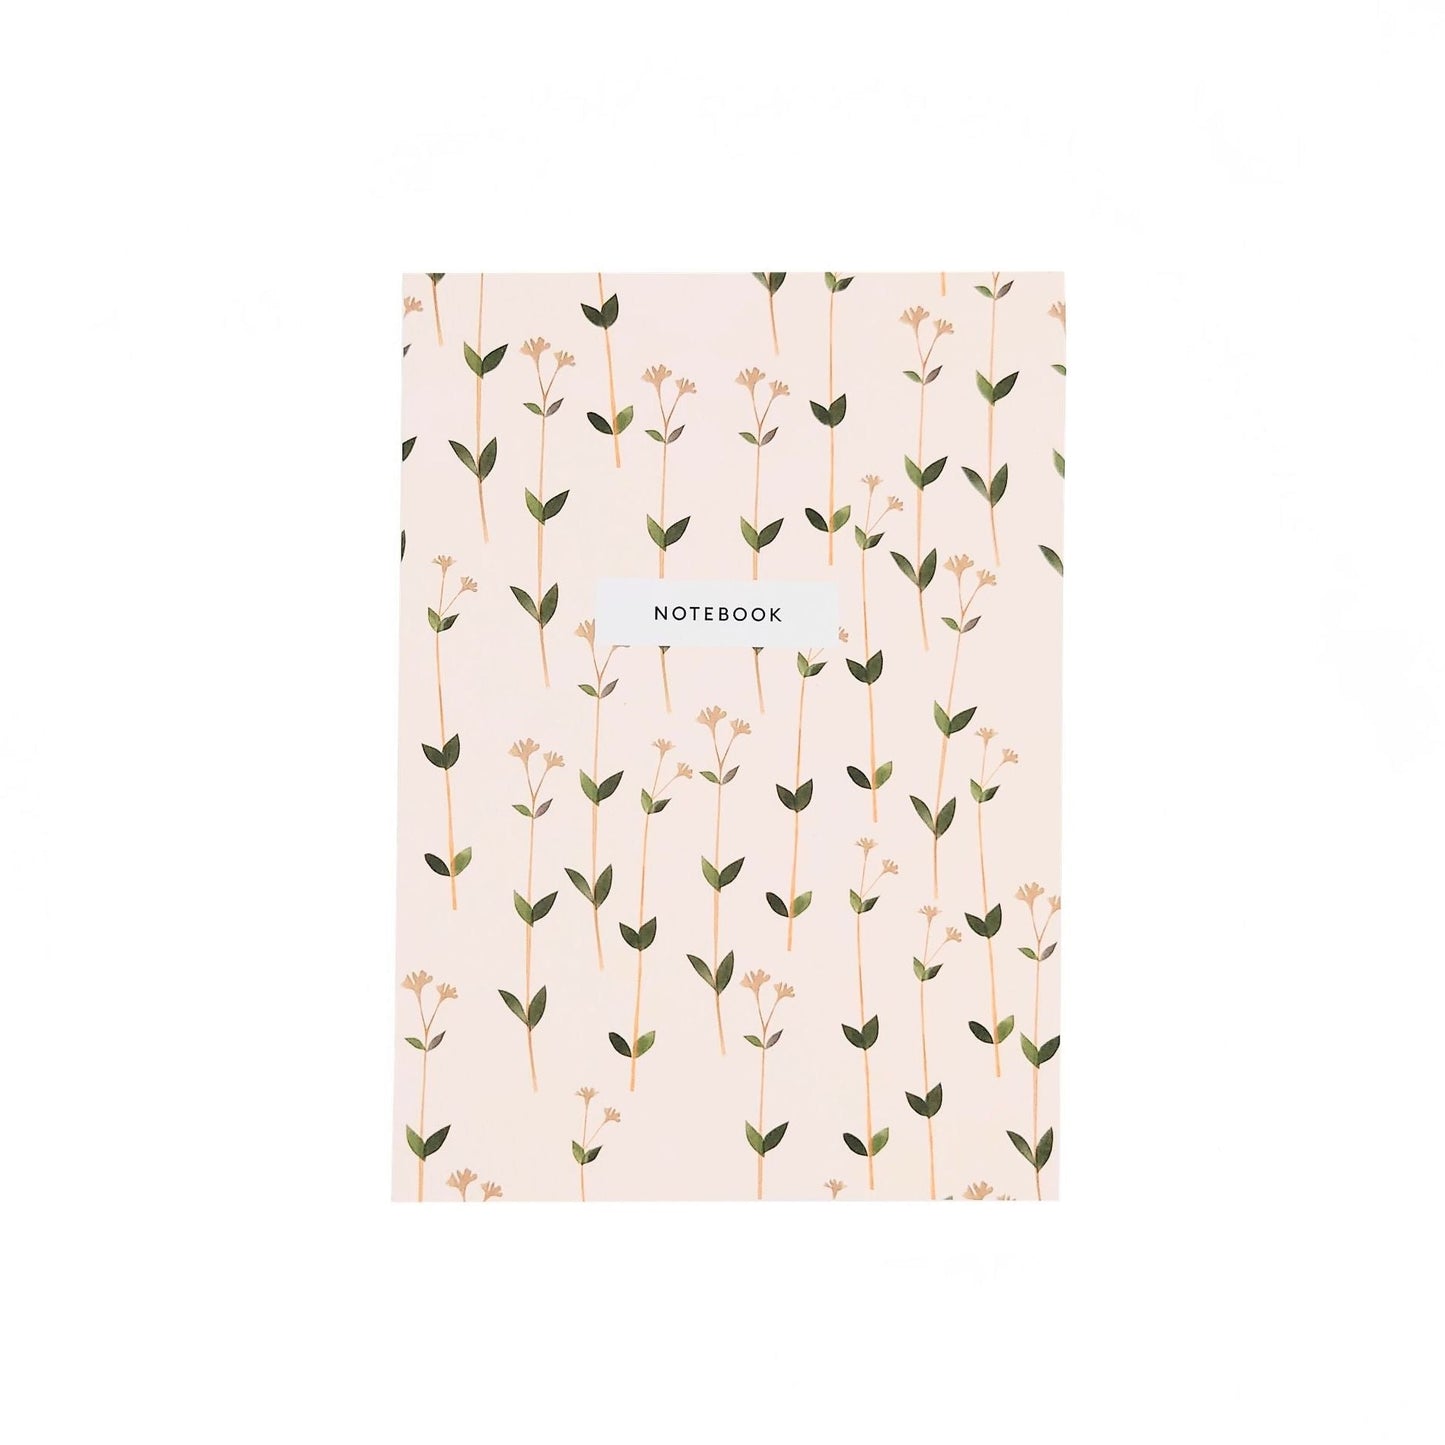 Ditsy print notebook in pale pink with many small thin weedy flowers. A white box is one third of the way down form the top with black text reading, notebook.